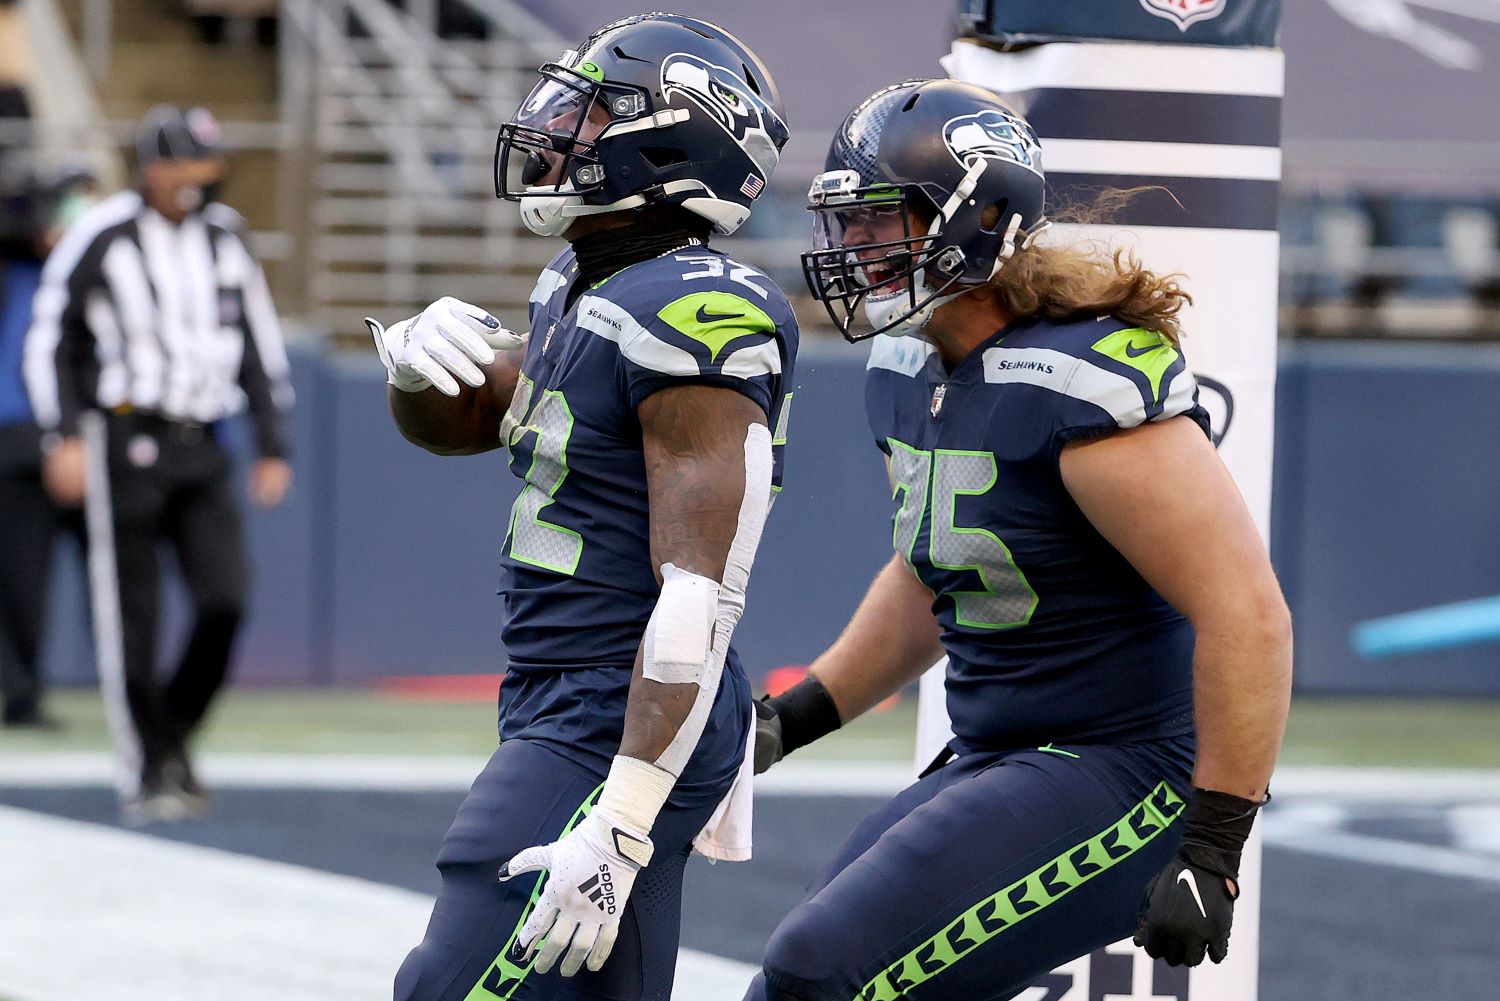 Former Seahawks OL Chad Wheeler reportedly had a wild struggle with police during his recent domestic violence arrest.